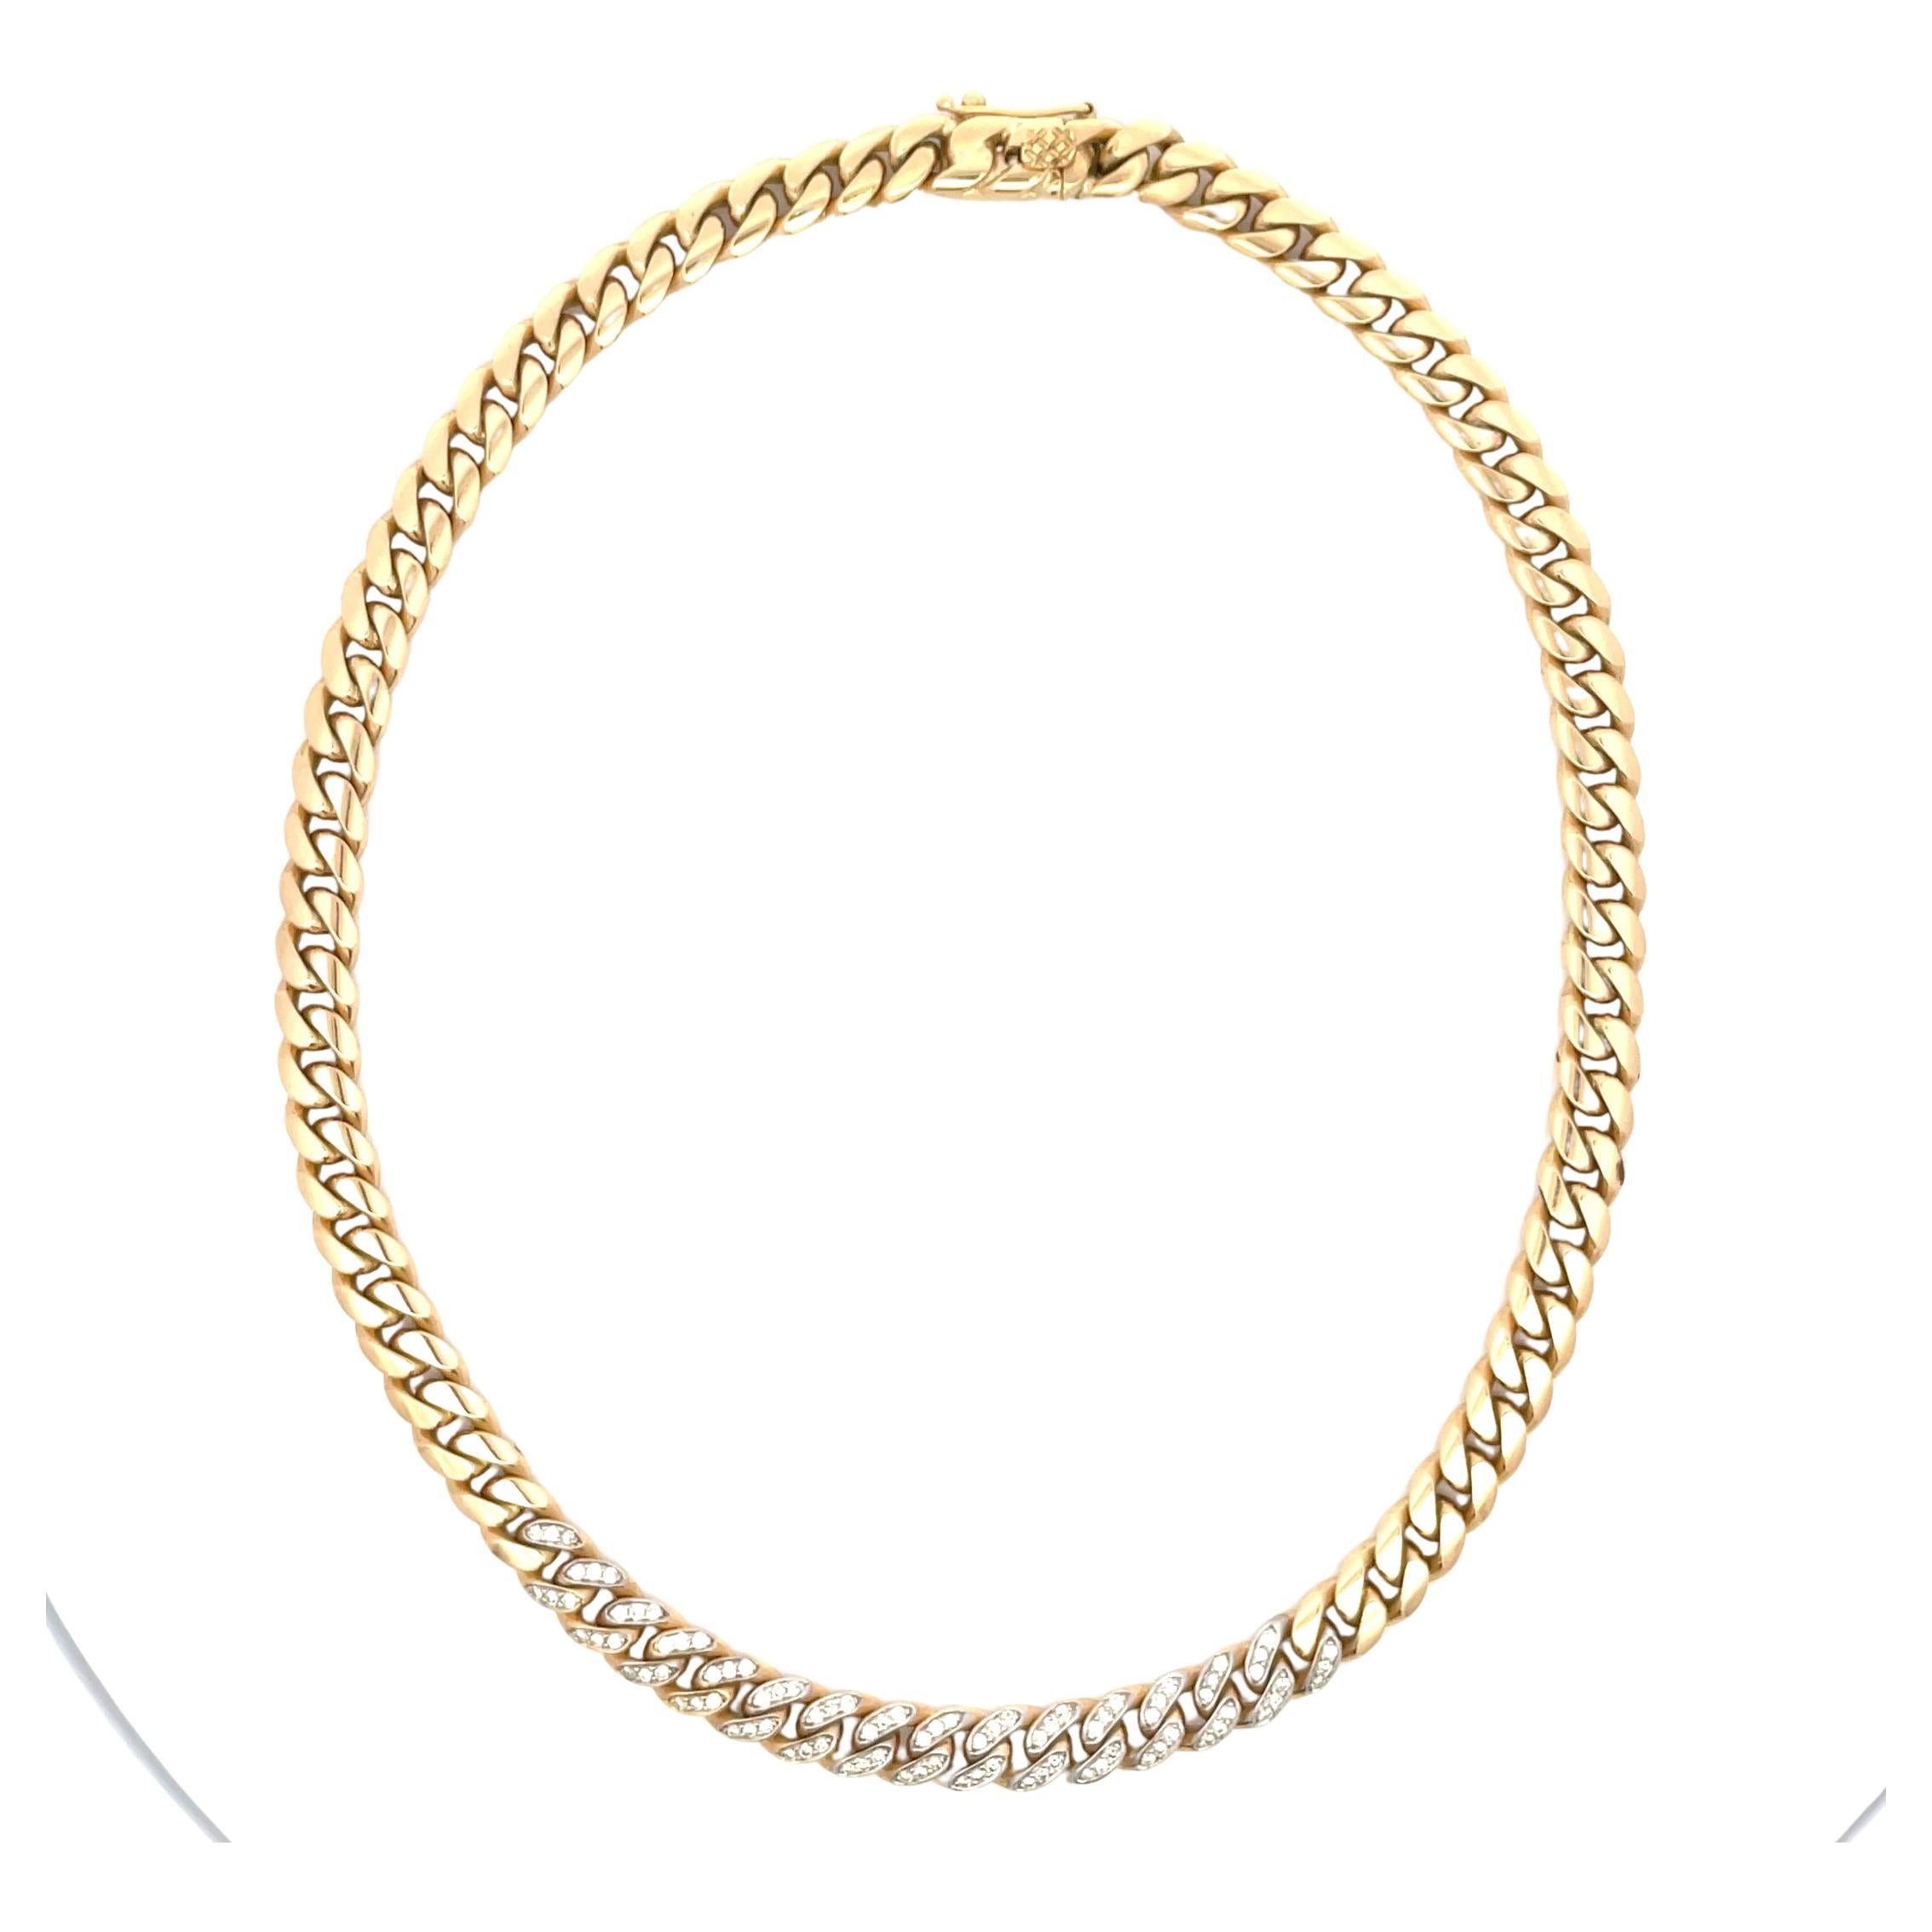 18 Karat yellow gold choker chain featuring a Cuban motif design and 15 diamond links weighing approximately 1 carat. 75.4 Grams
Can be worn two ways - diamonds showing or plain gold 